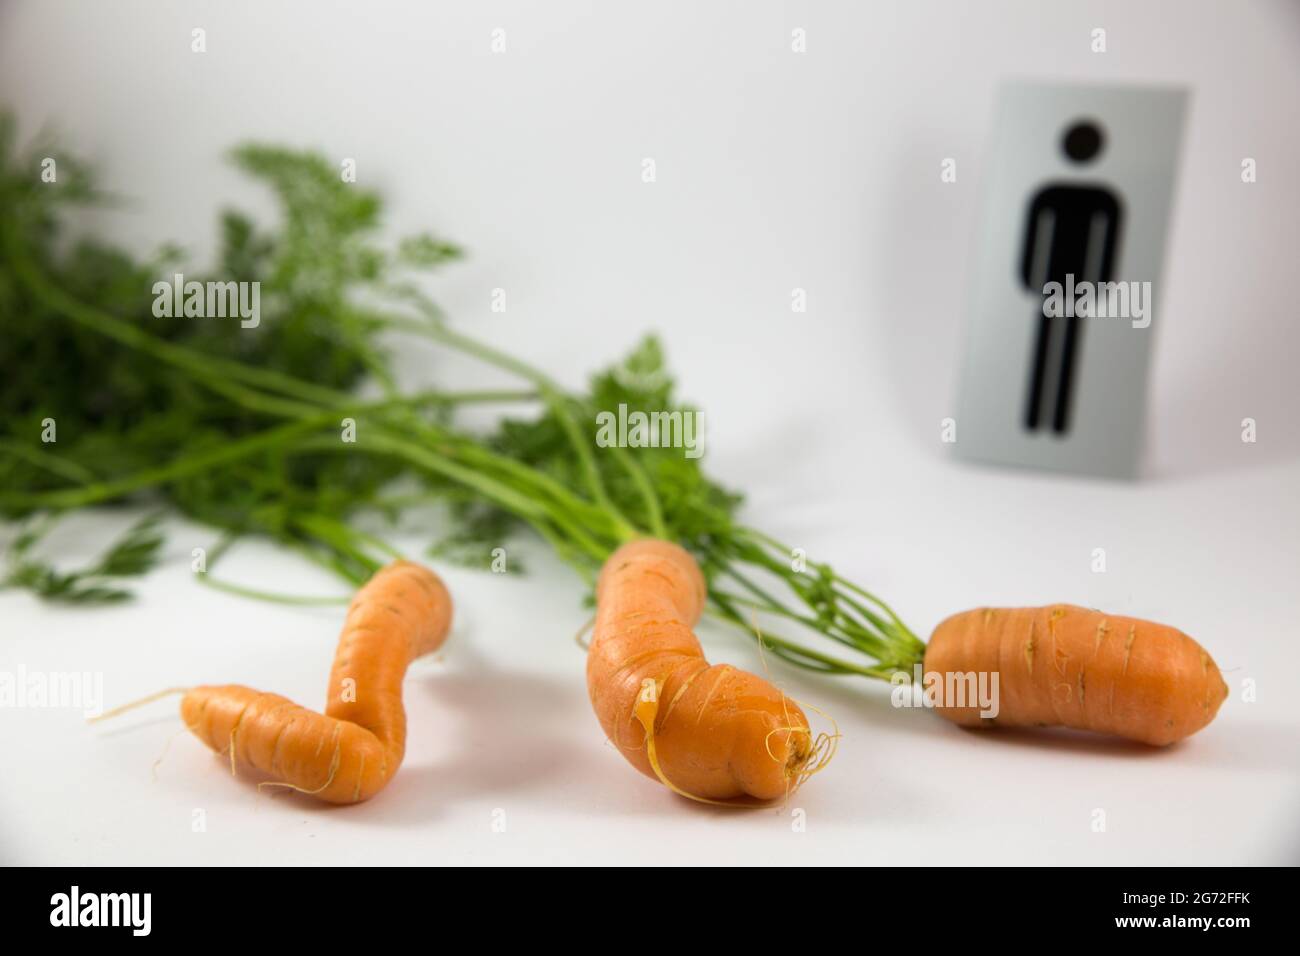 Isolated rude carrots with a 'male' sign on a white background Stock Photo